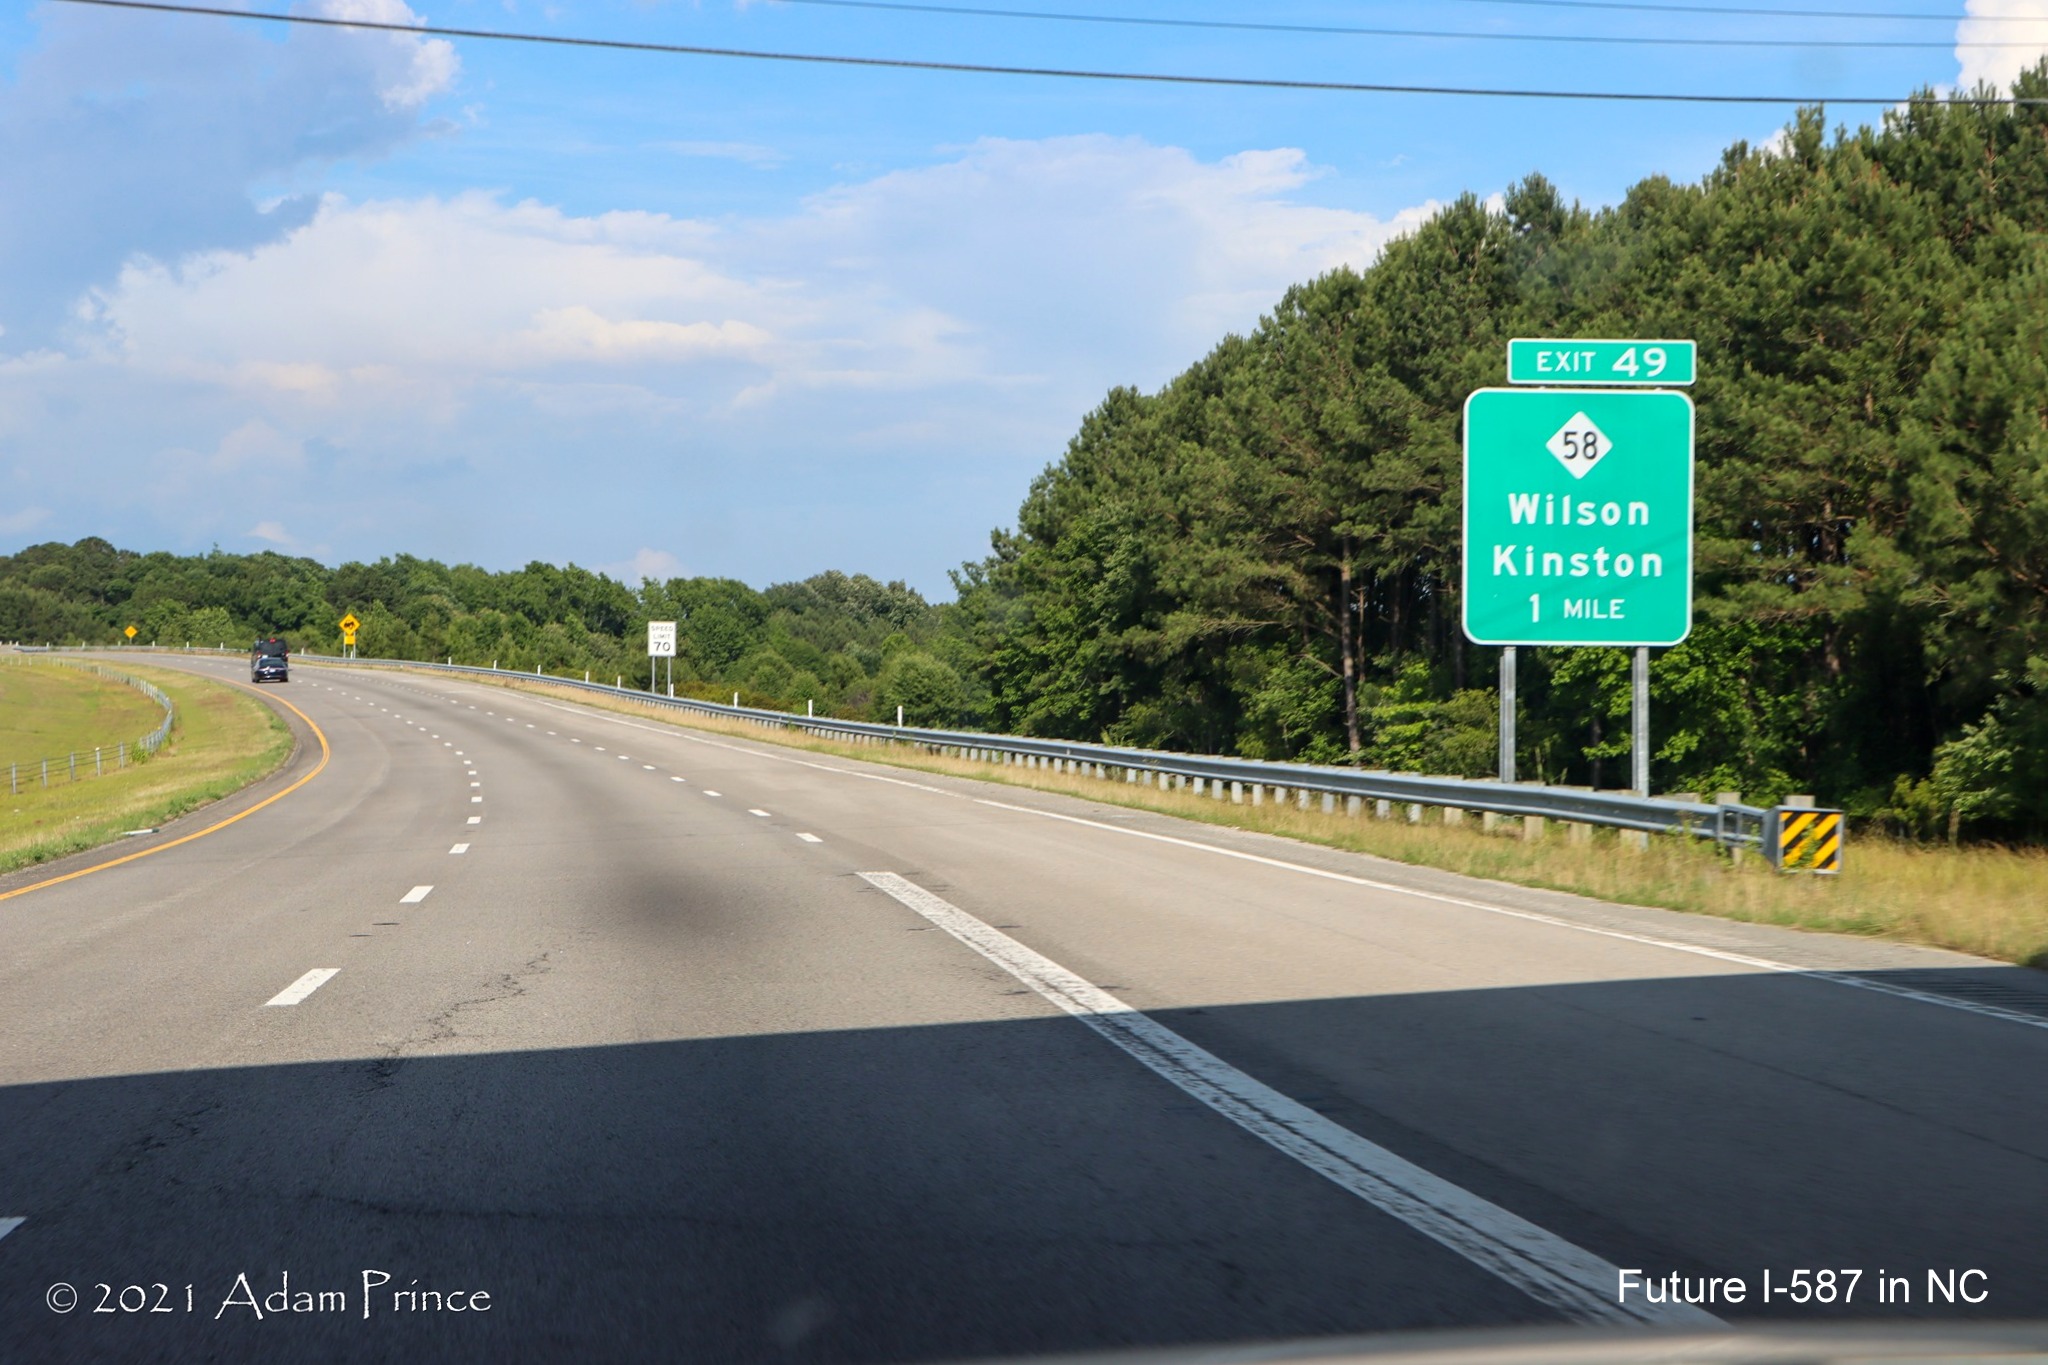 1 Mile advance sign for NC 58 exit on US 264 East (Future I-587 South) in Wilson, photo by Adam Prince, June 2021